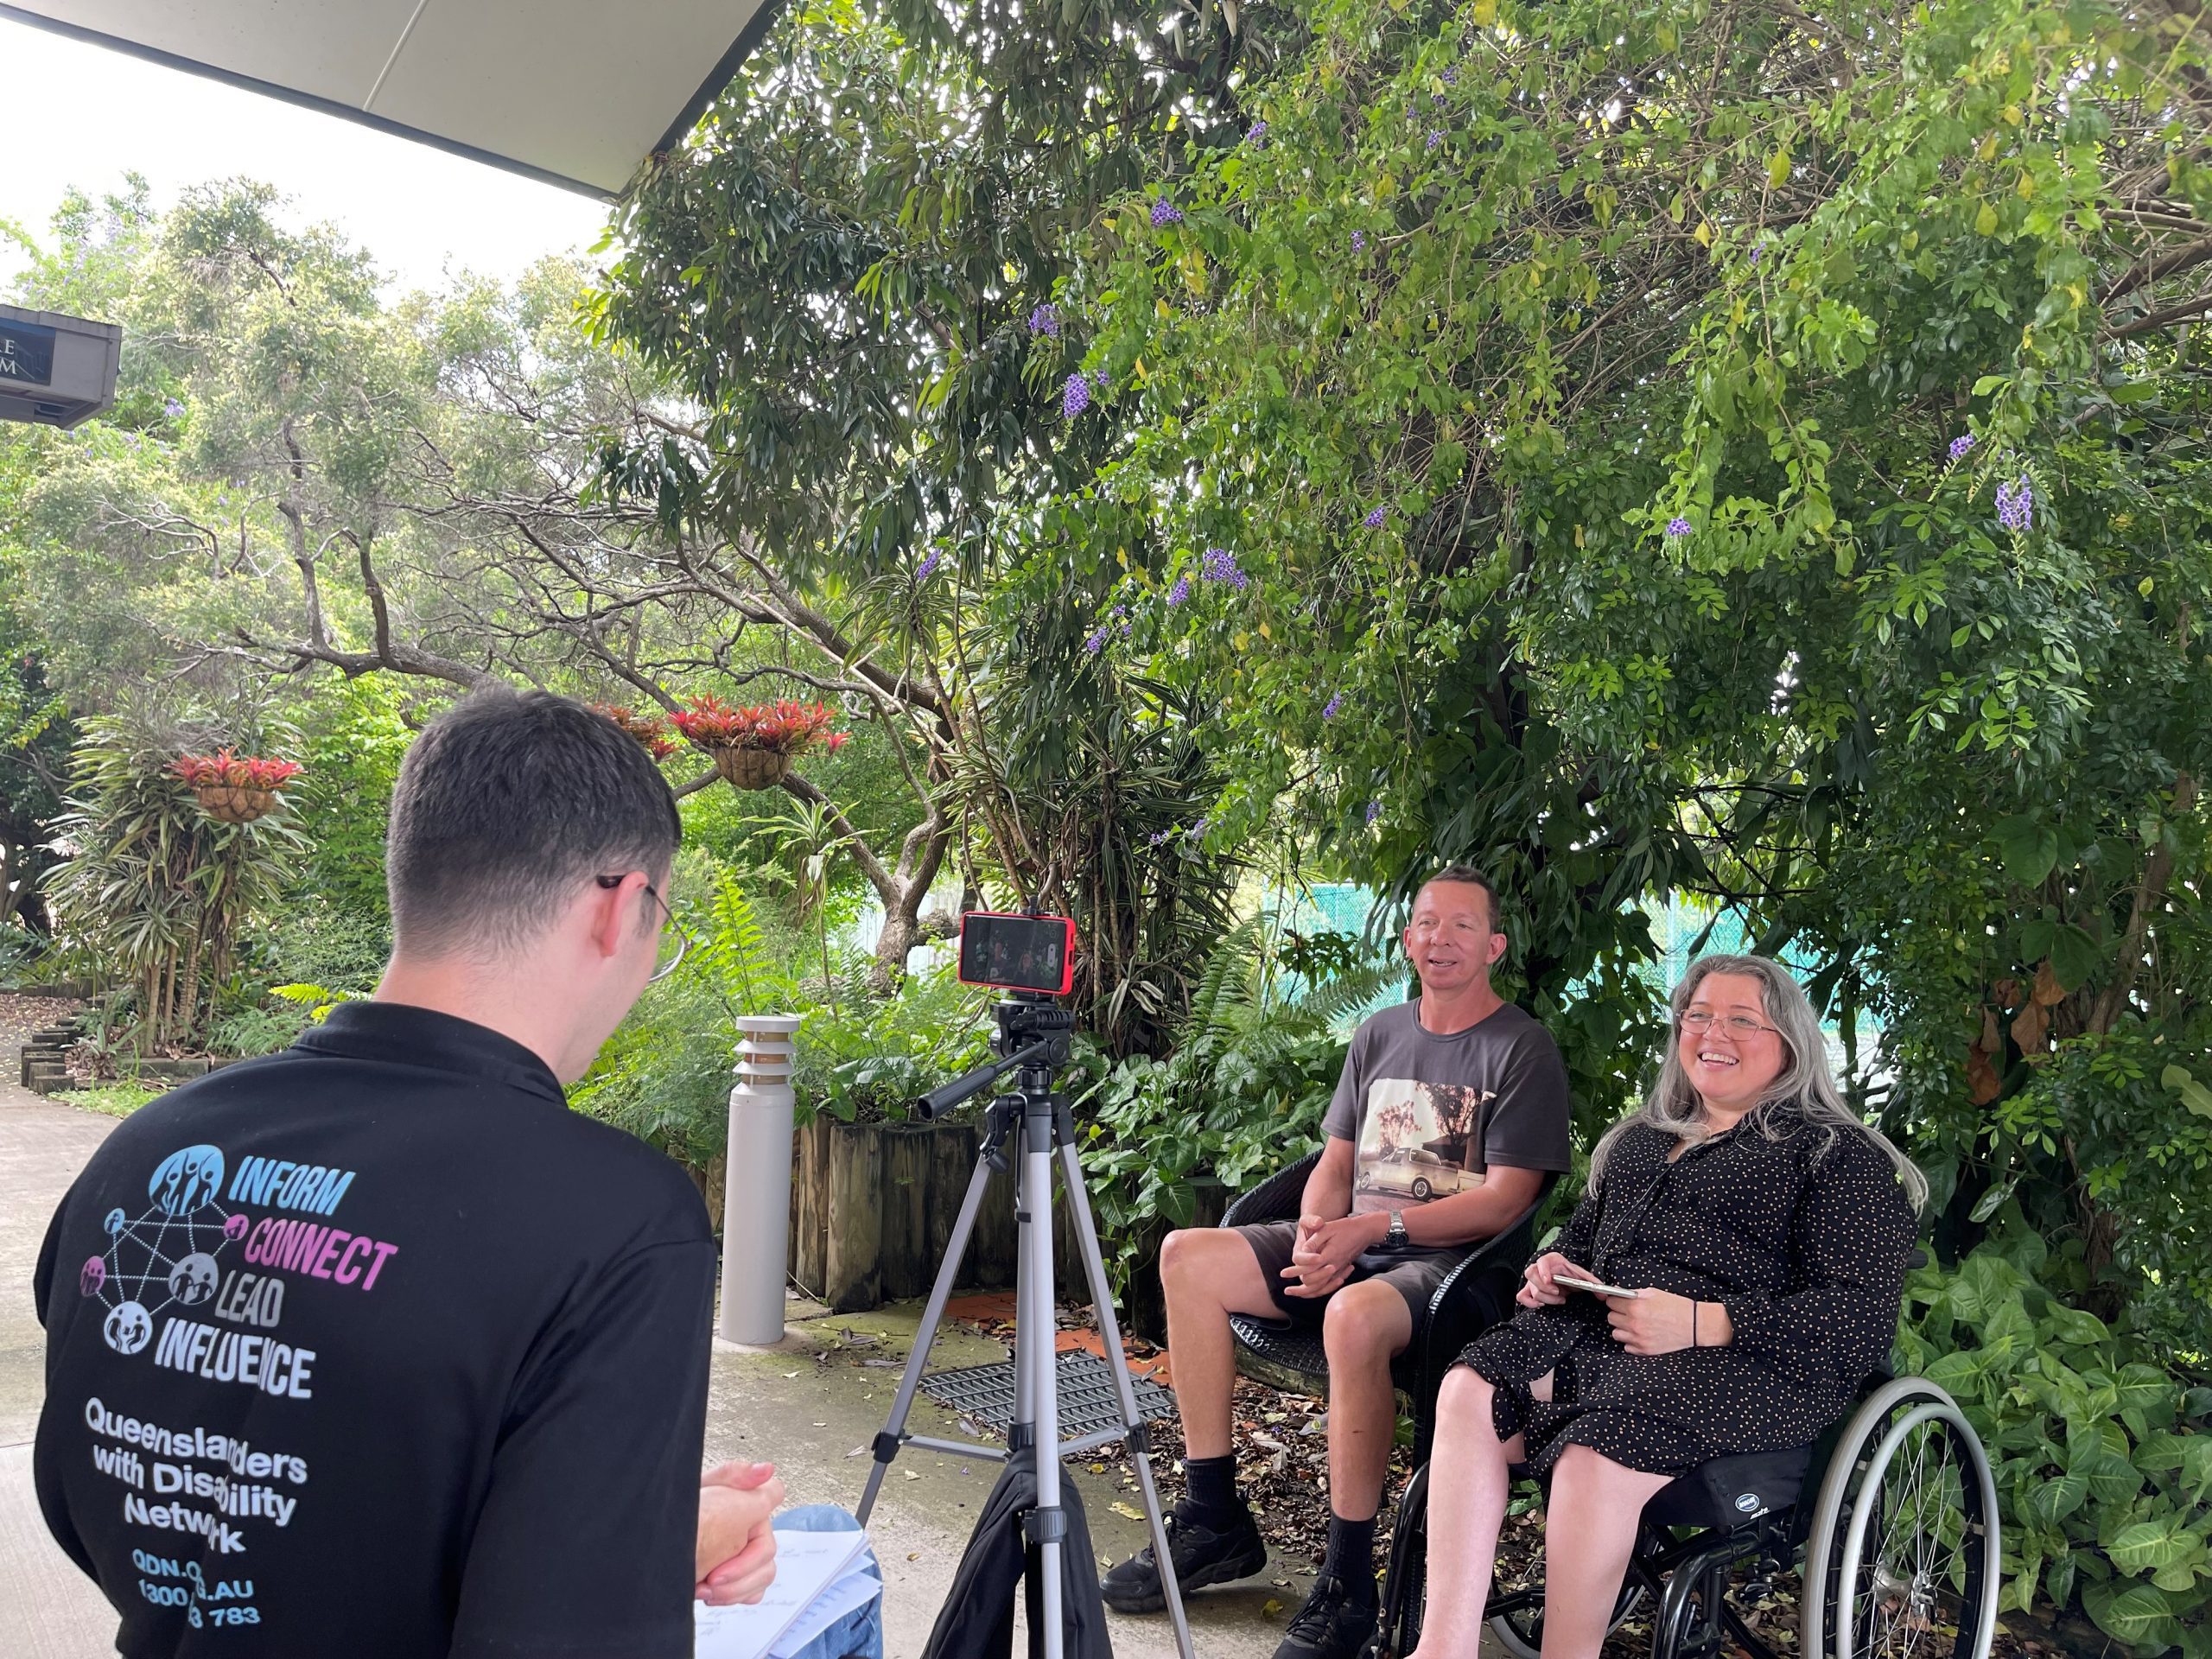 A woman in a wheelchair with long grey hair and a man sitting next to her with short brown hair. They are looking into a phone on a tripod with a man with his back to us wearing a QDN polo shirt.